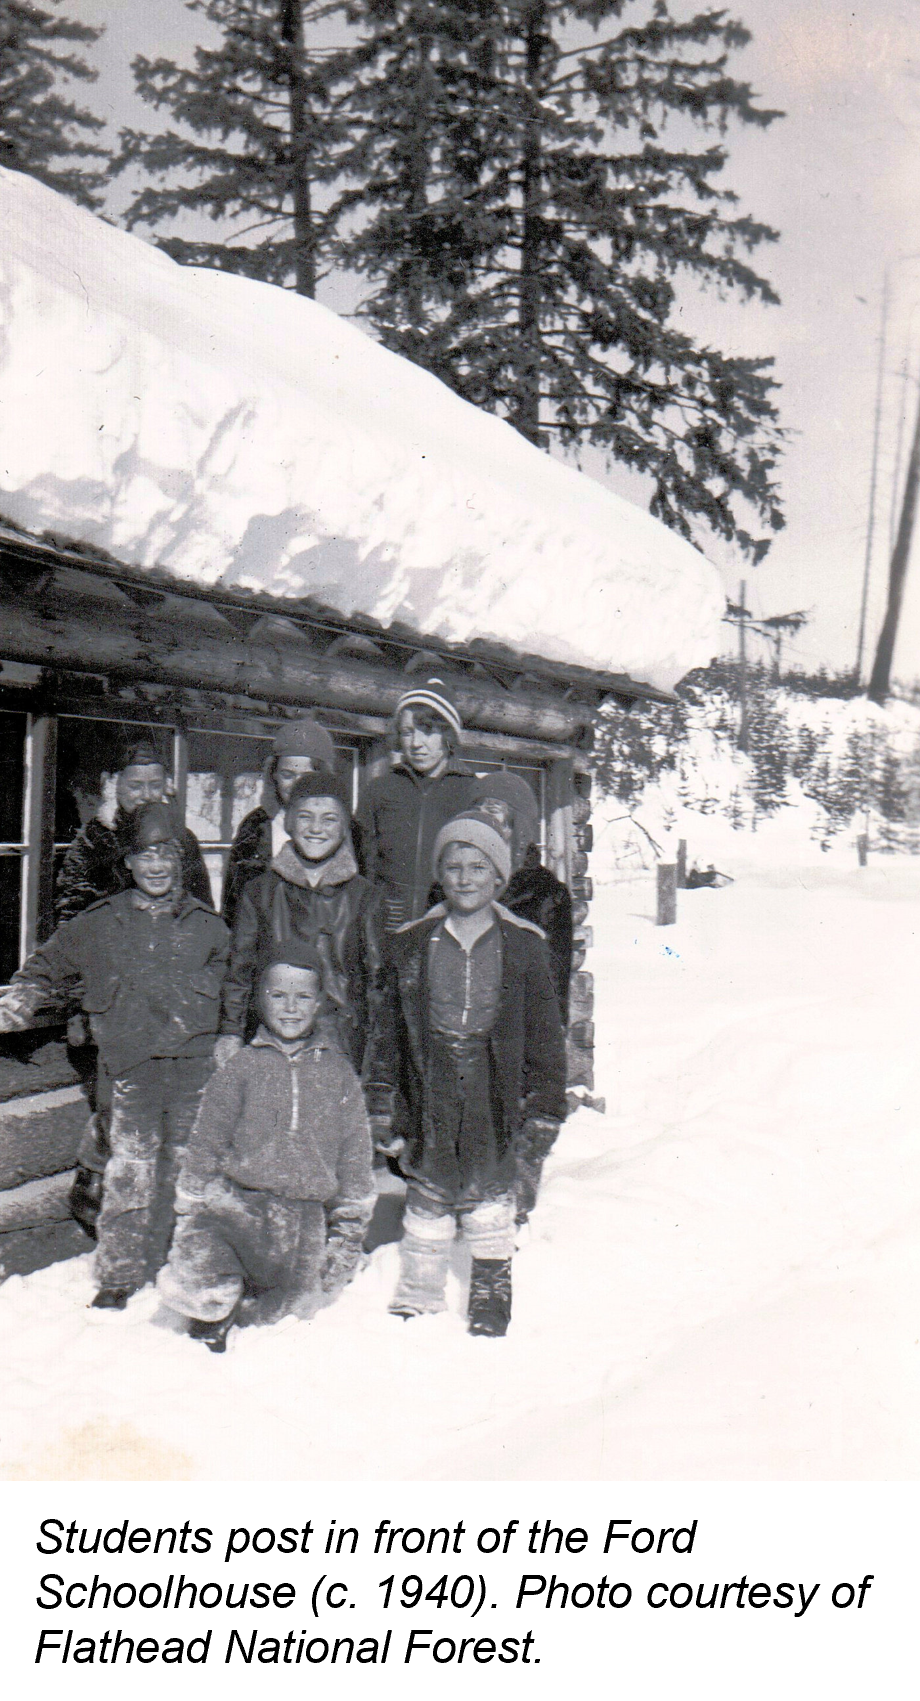 A group of Ford Schoolhouse students gathers outside in front of the snow-covered school (1940)